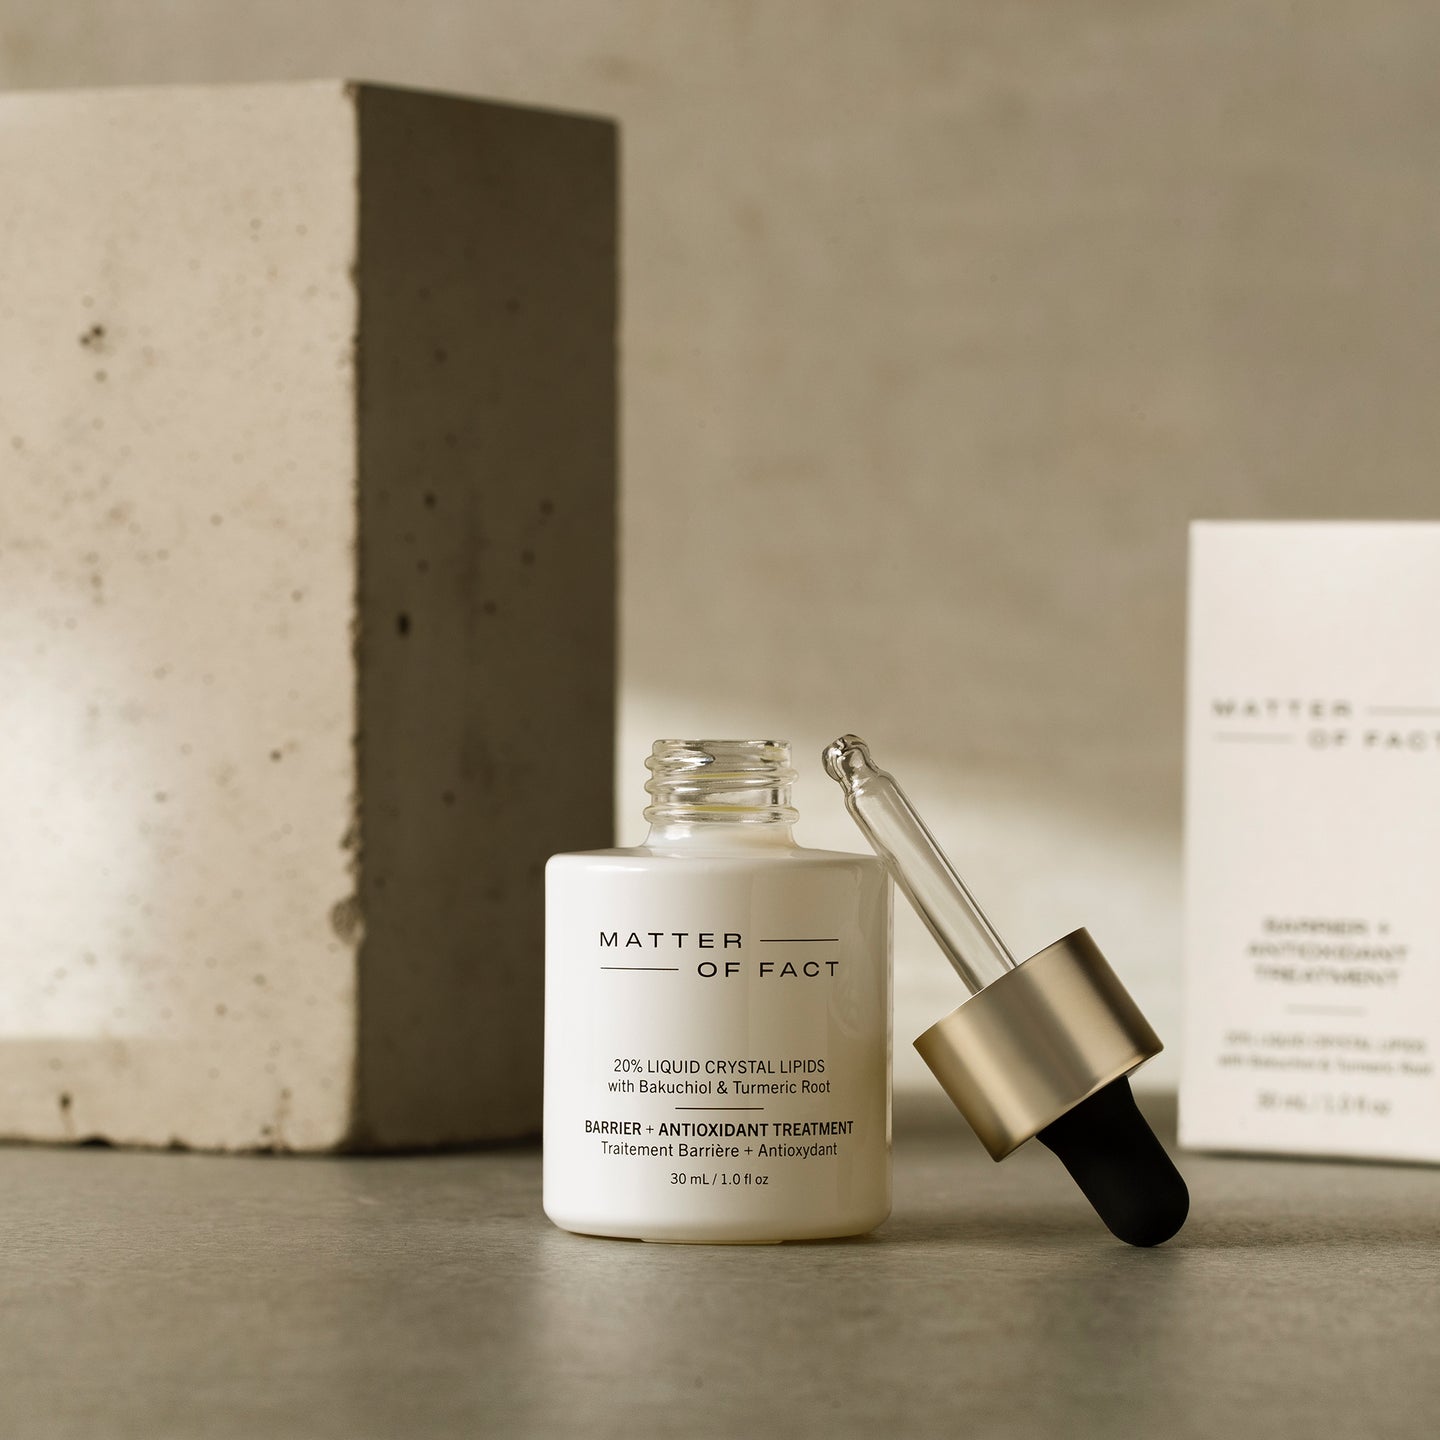 MATTER OF FACT SKINCARE BARRIER AND ANTIOXIDANT TREATMENT product vessel on a beige background with the product packaging and applicator visible